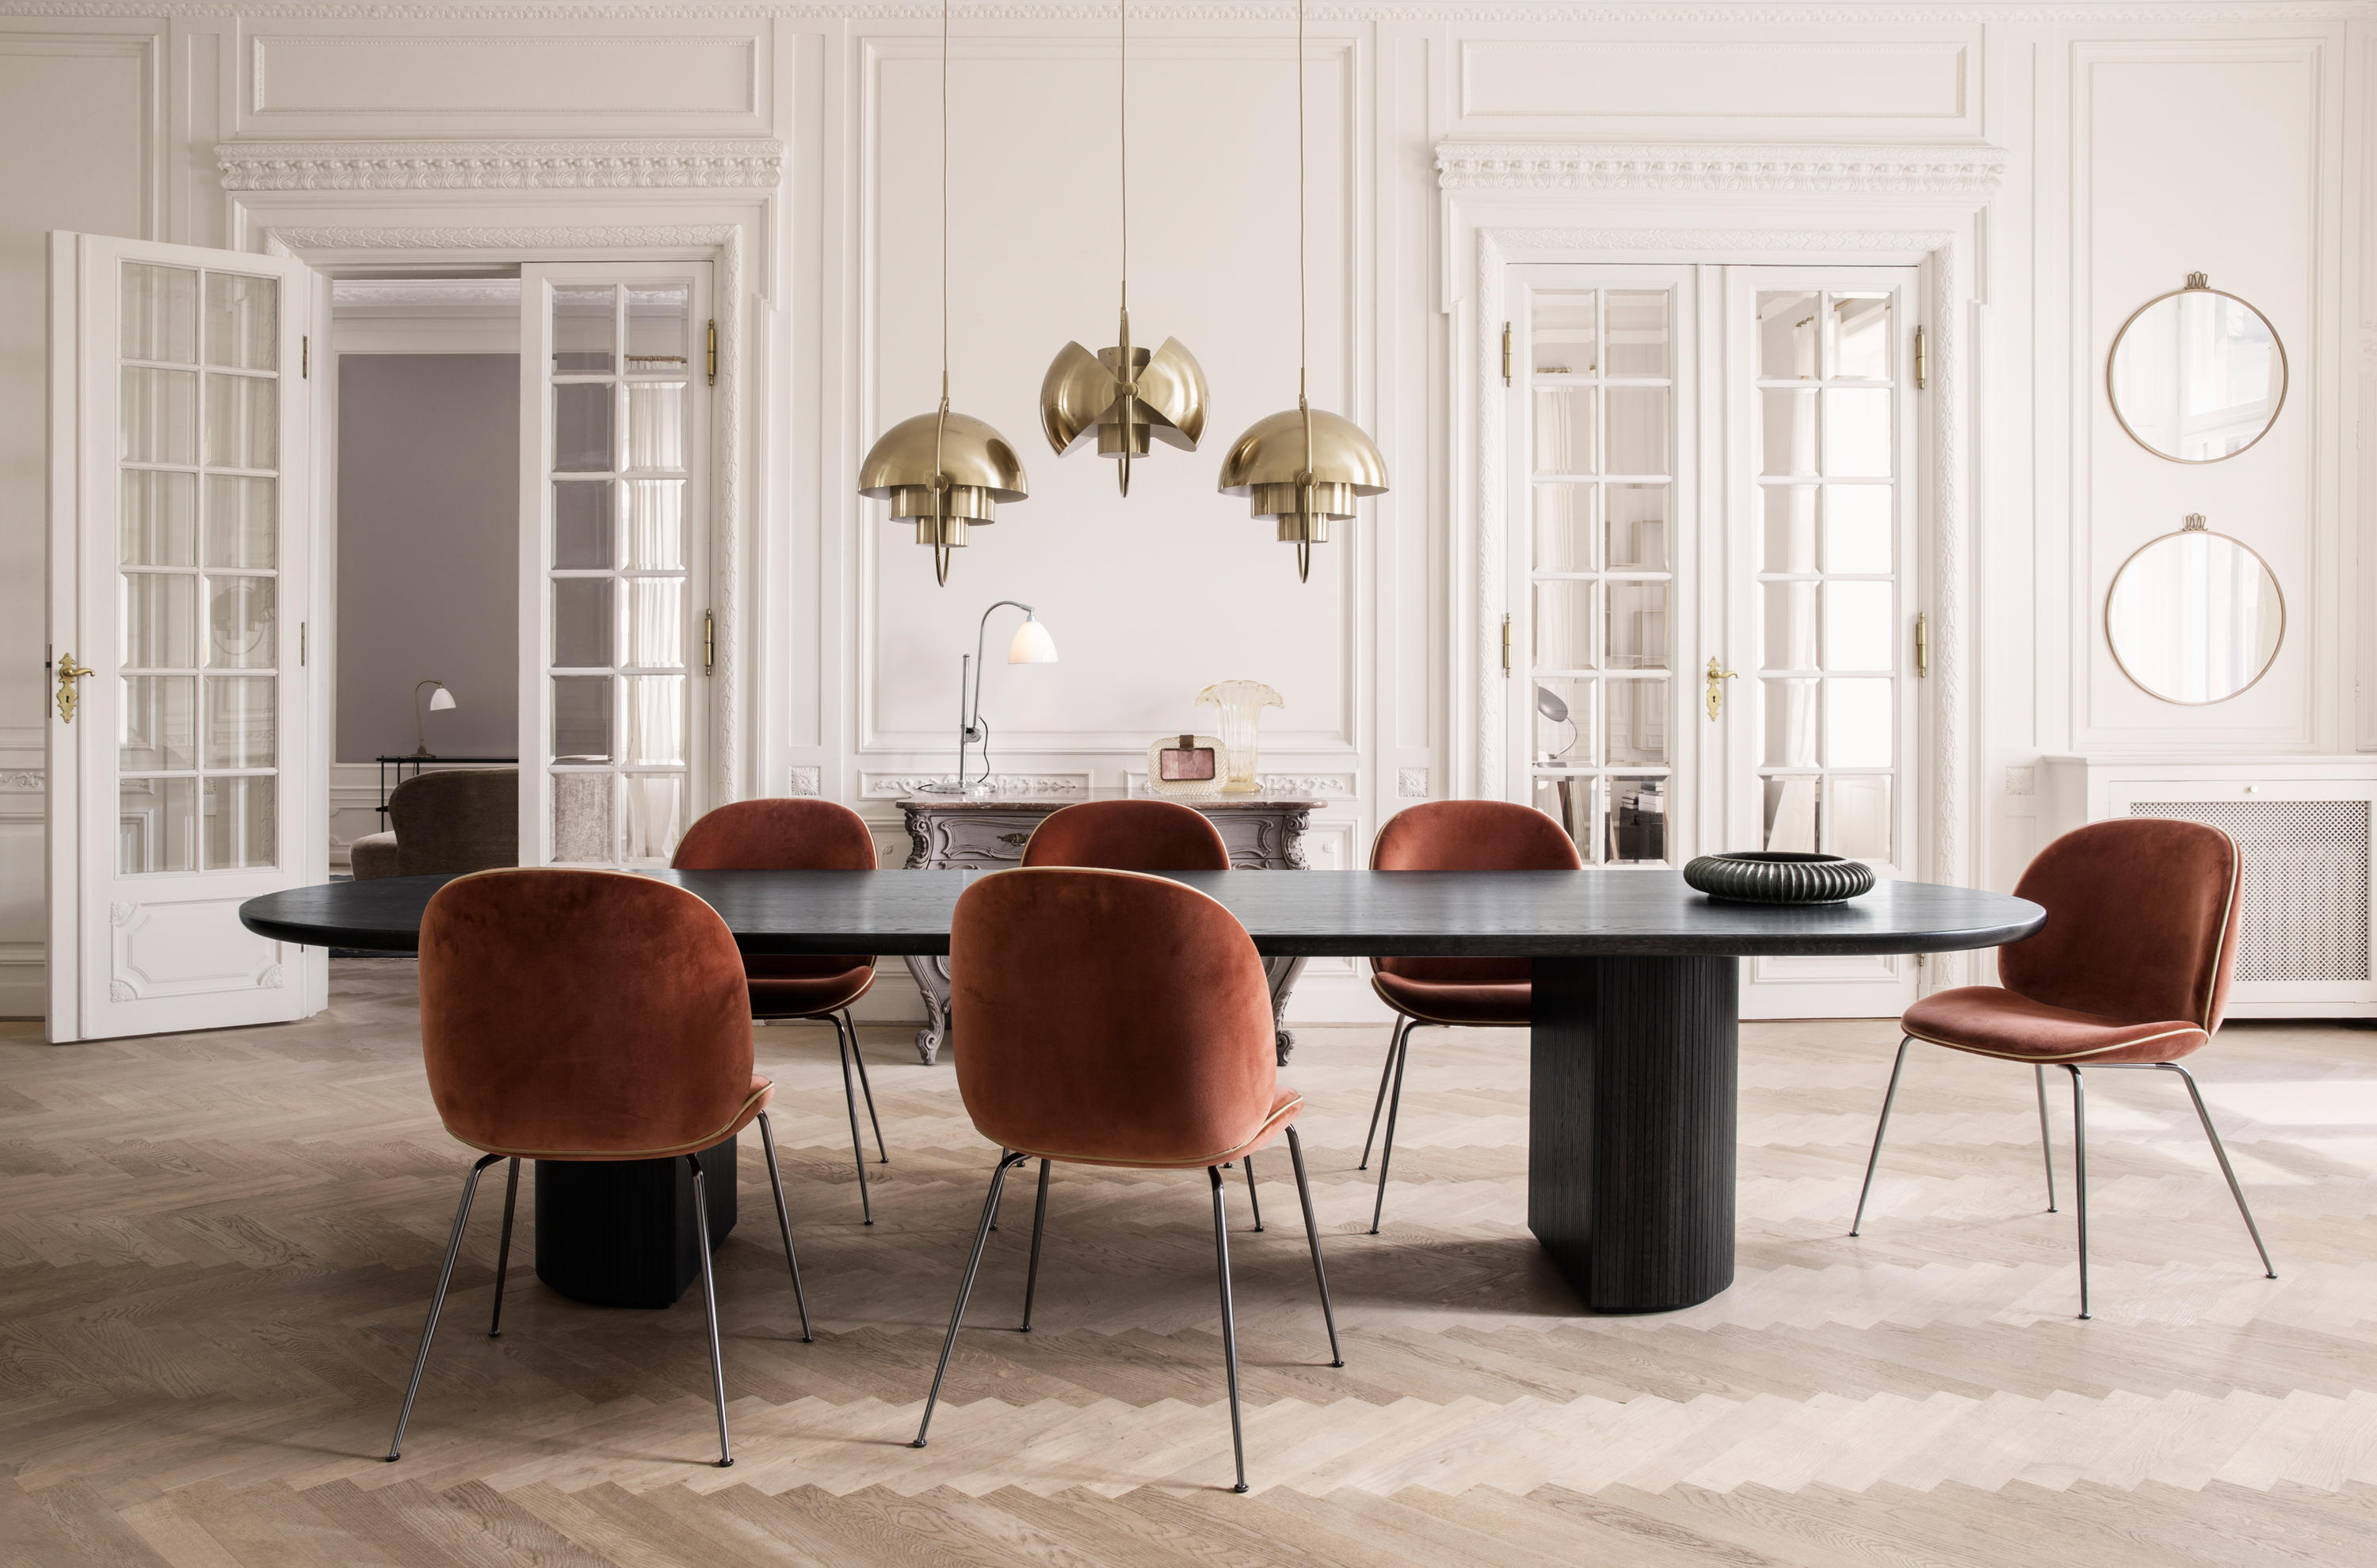 MOON DINING TABLE Dining Tables From GUBI Architonic